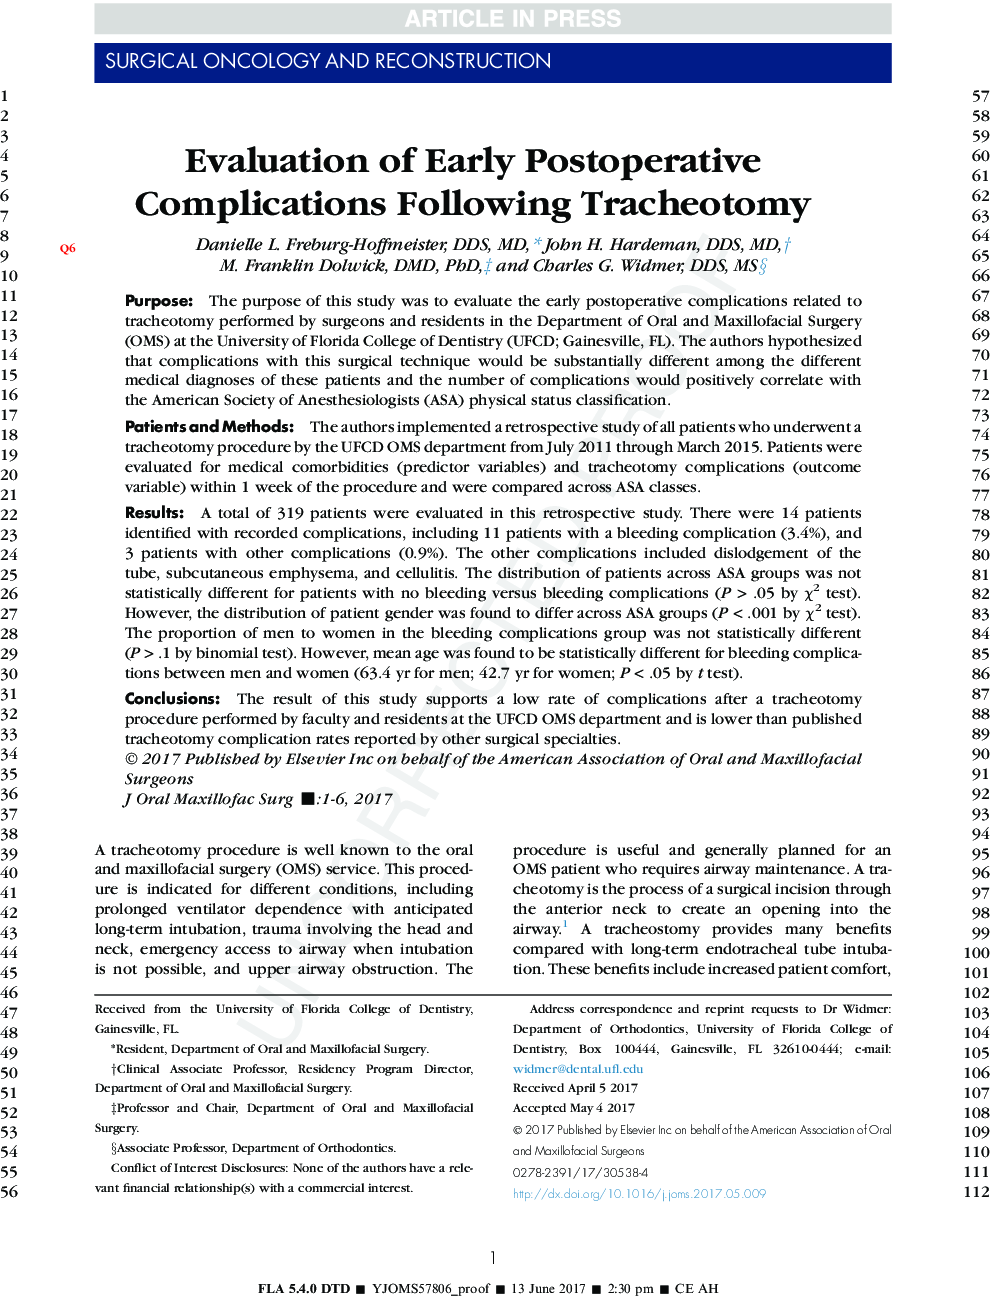 Evaluation of Early Postoperative Complications Following Tracheotomy